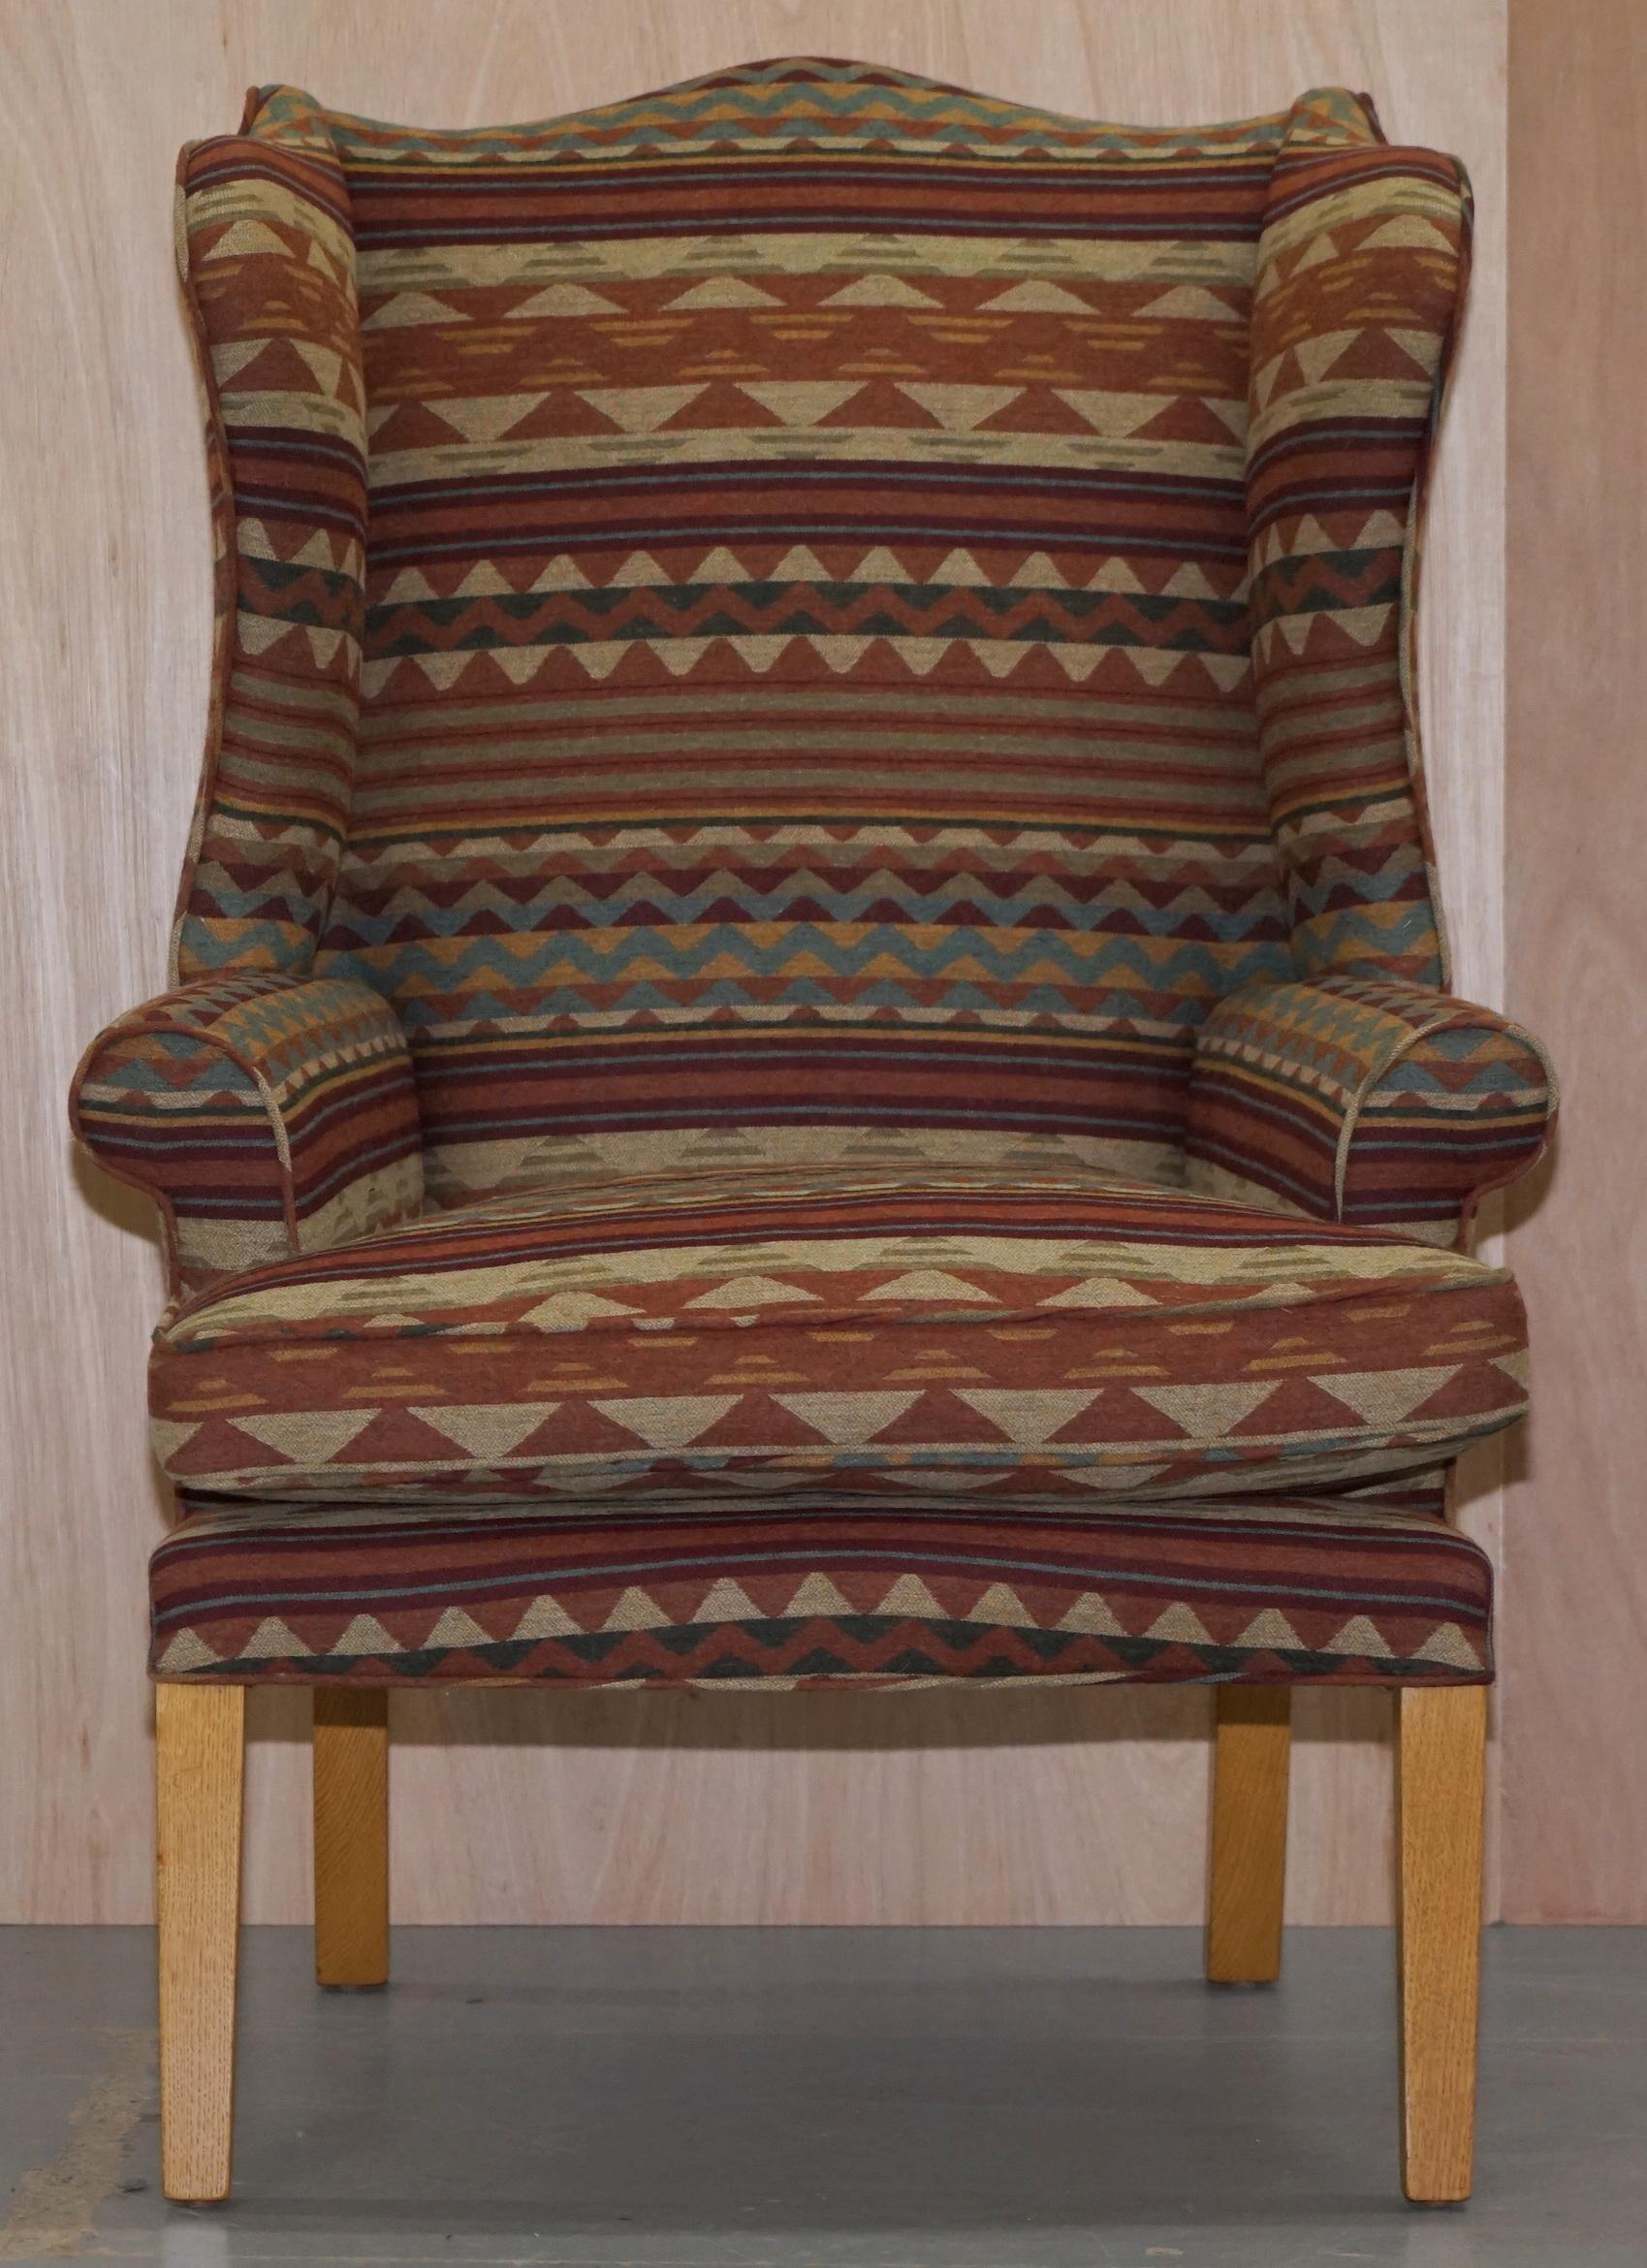 We are delighted to offer for sale this stunning Kilim upholstered wingback armchair in perfect condition throughout 

A well made and decorative armchair which is very comfortable, the upholstery is Kilim as mentioned which is just about as